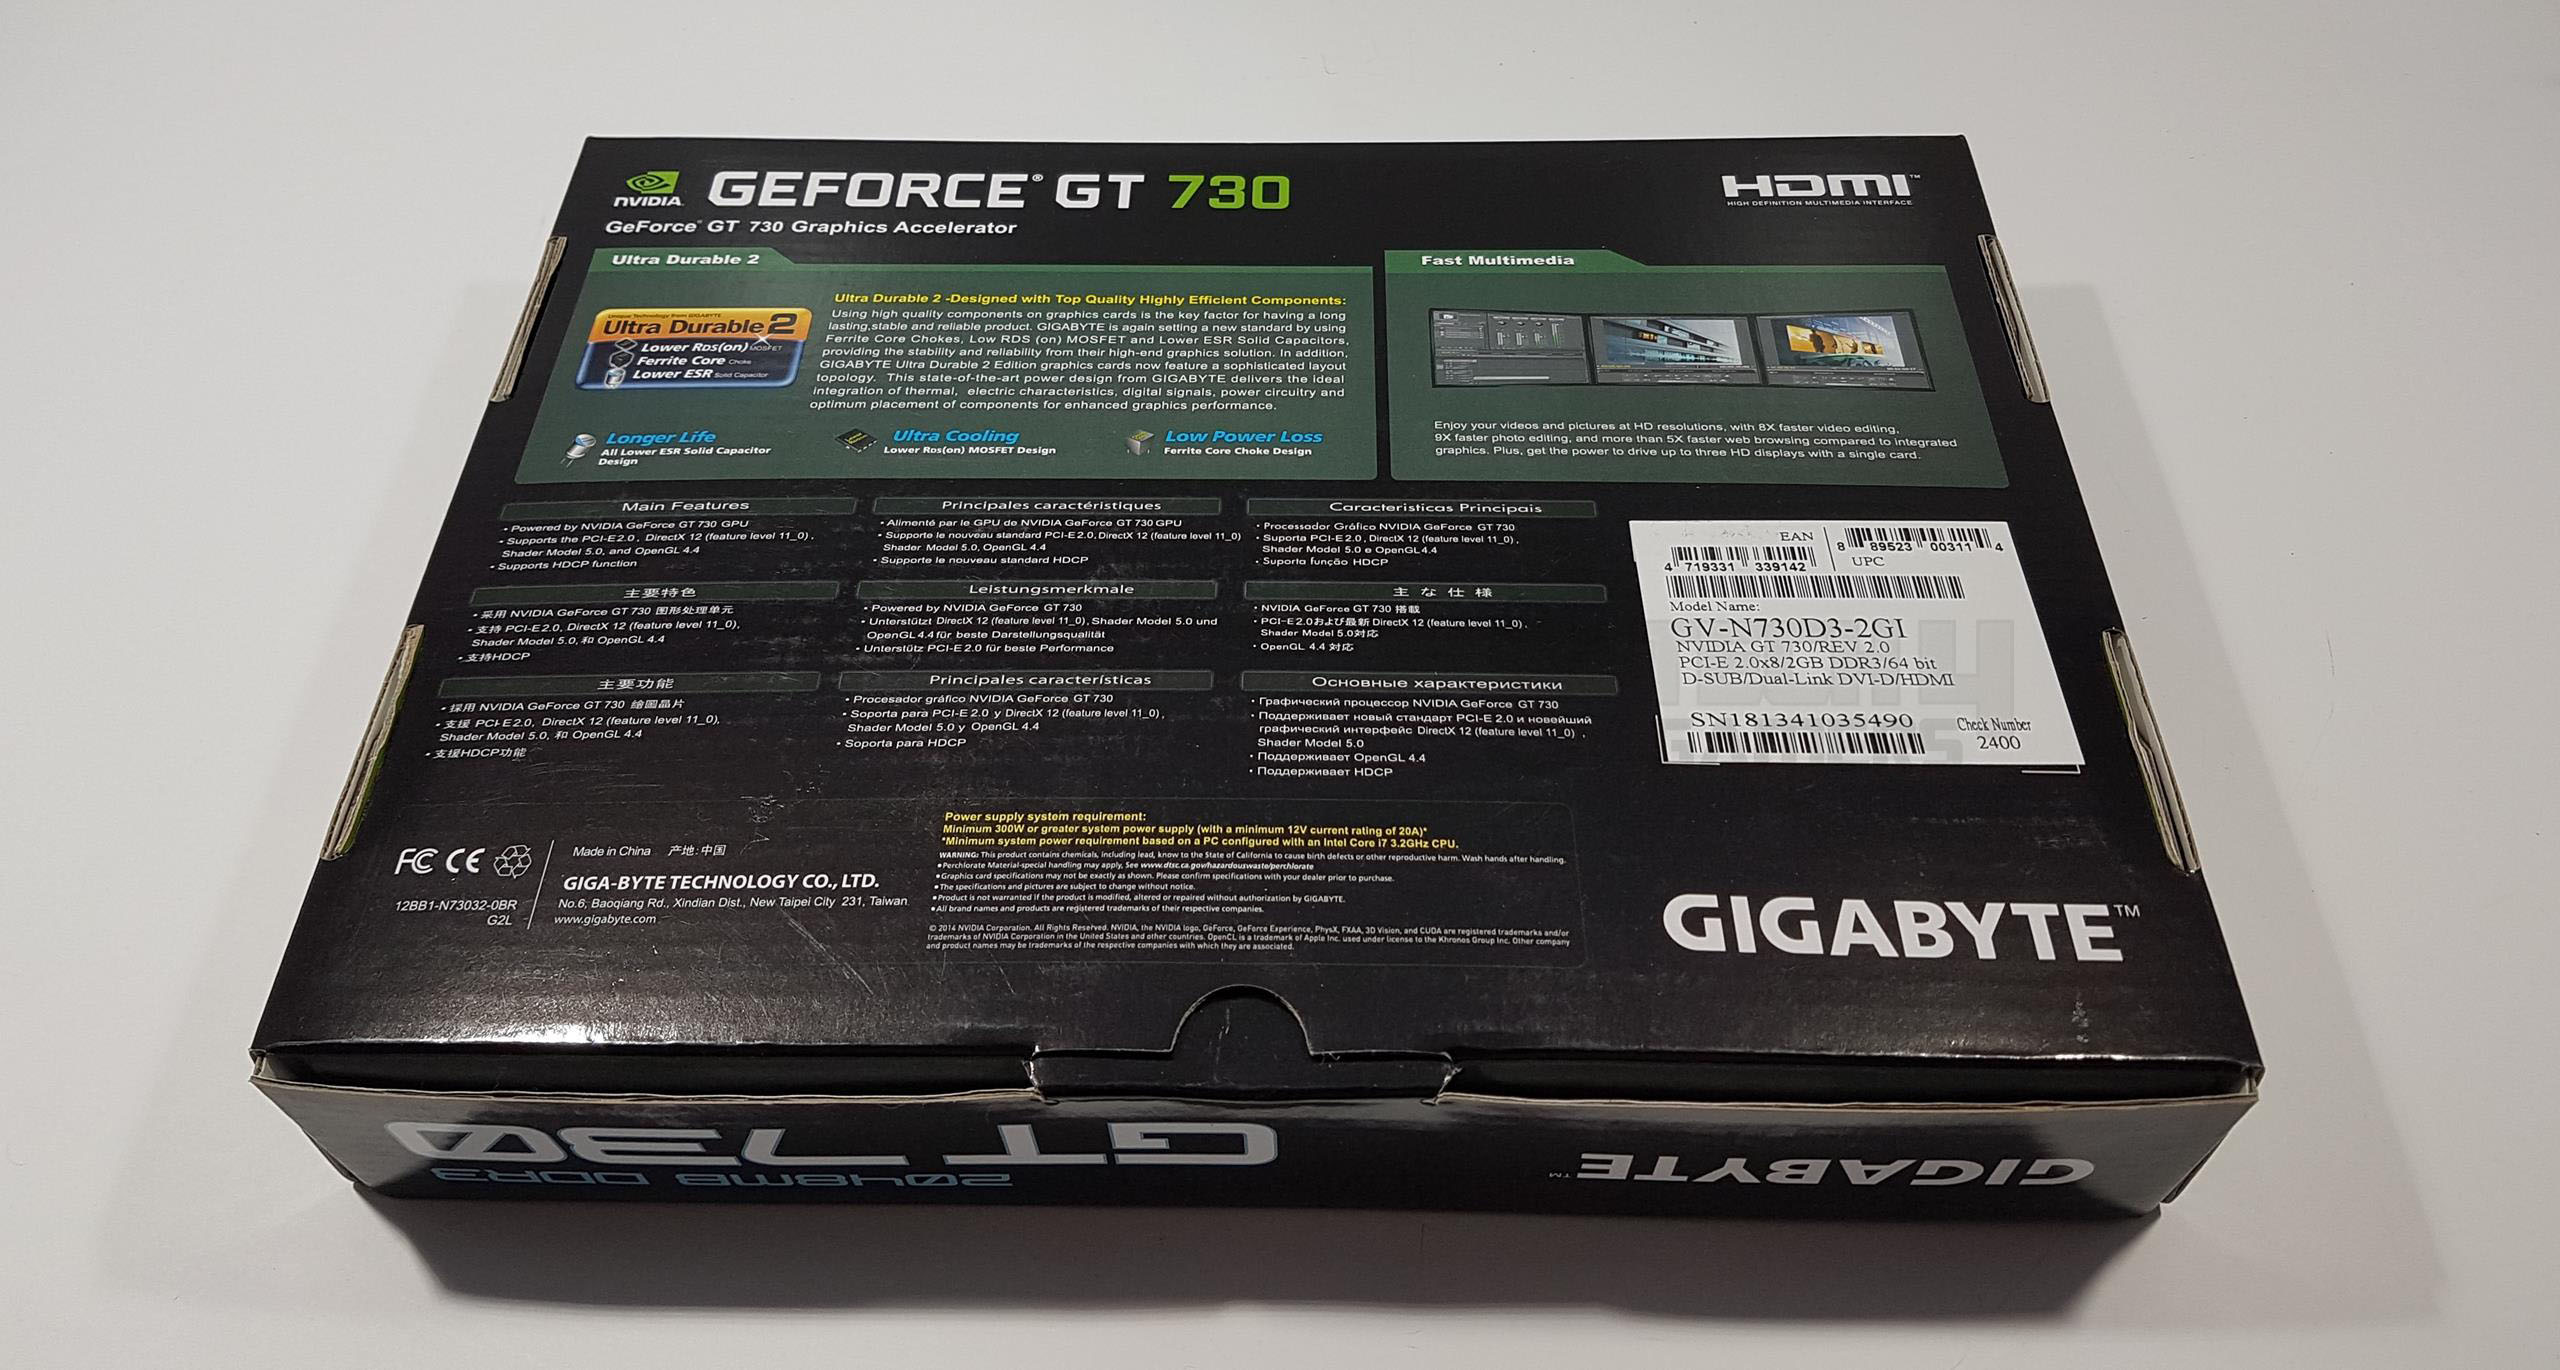 Gigabyte GT 730 Review: Worth It? - Tech4Gamers